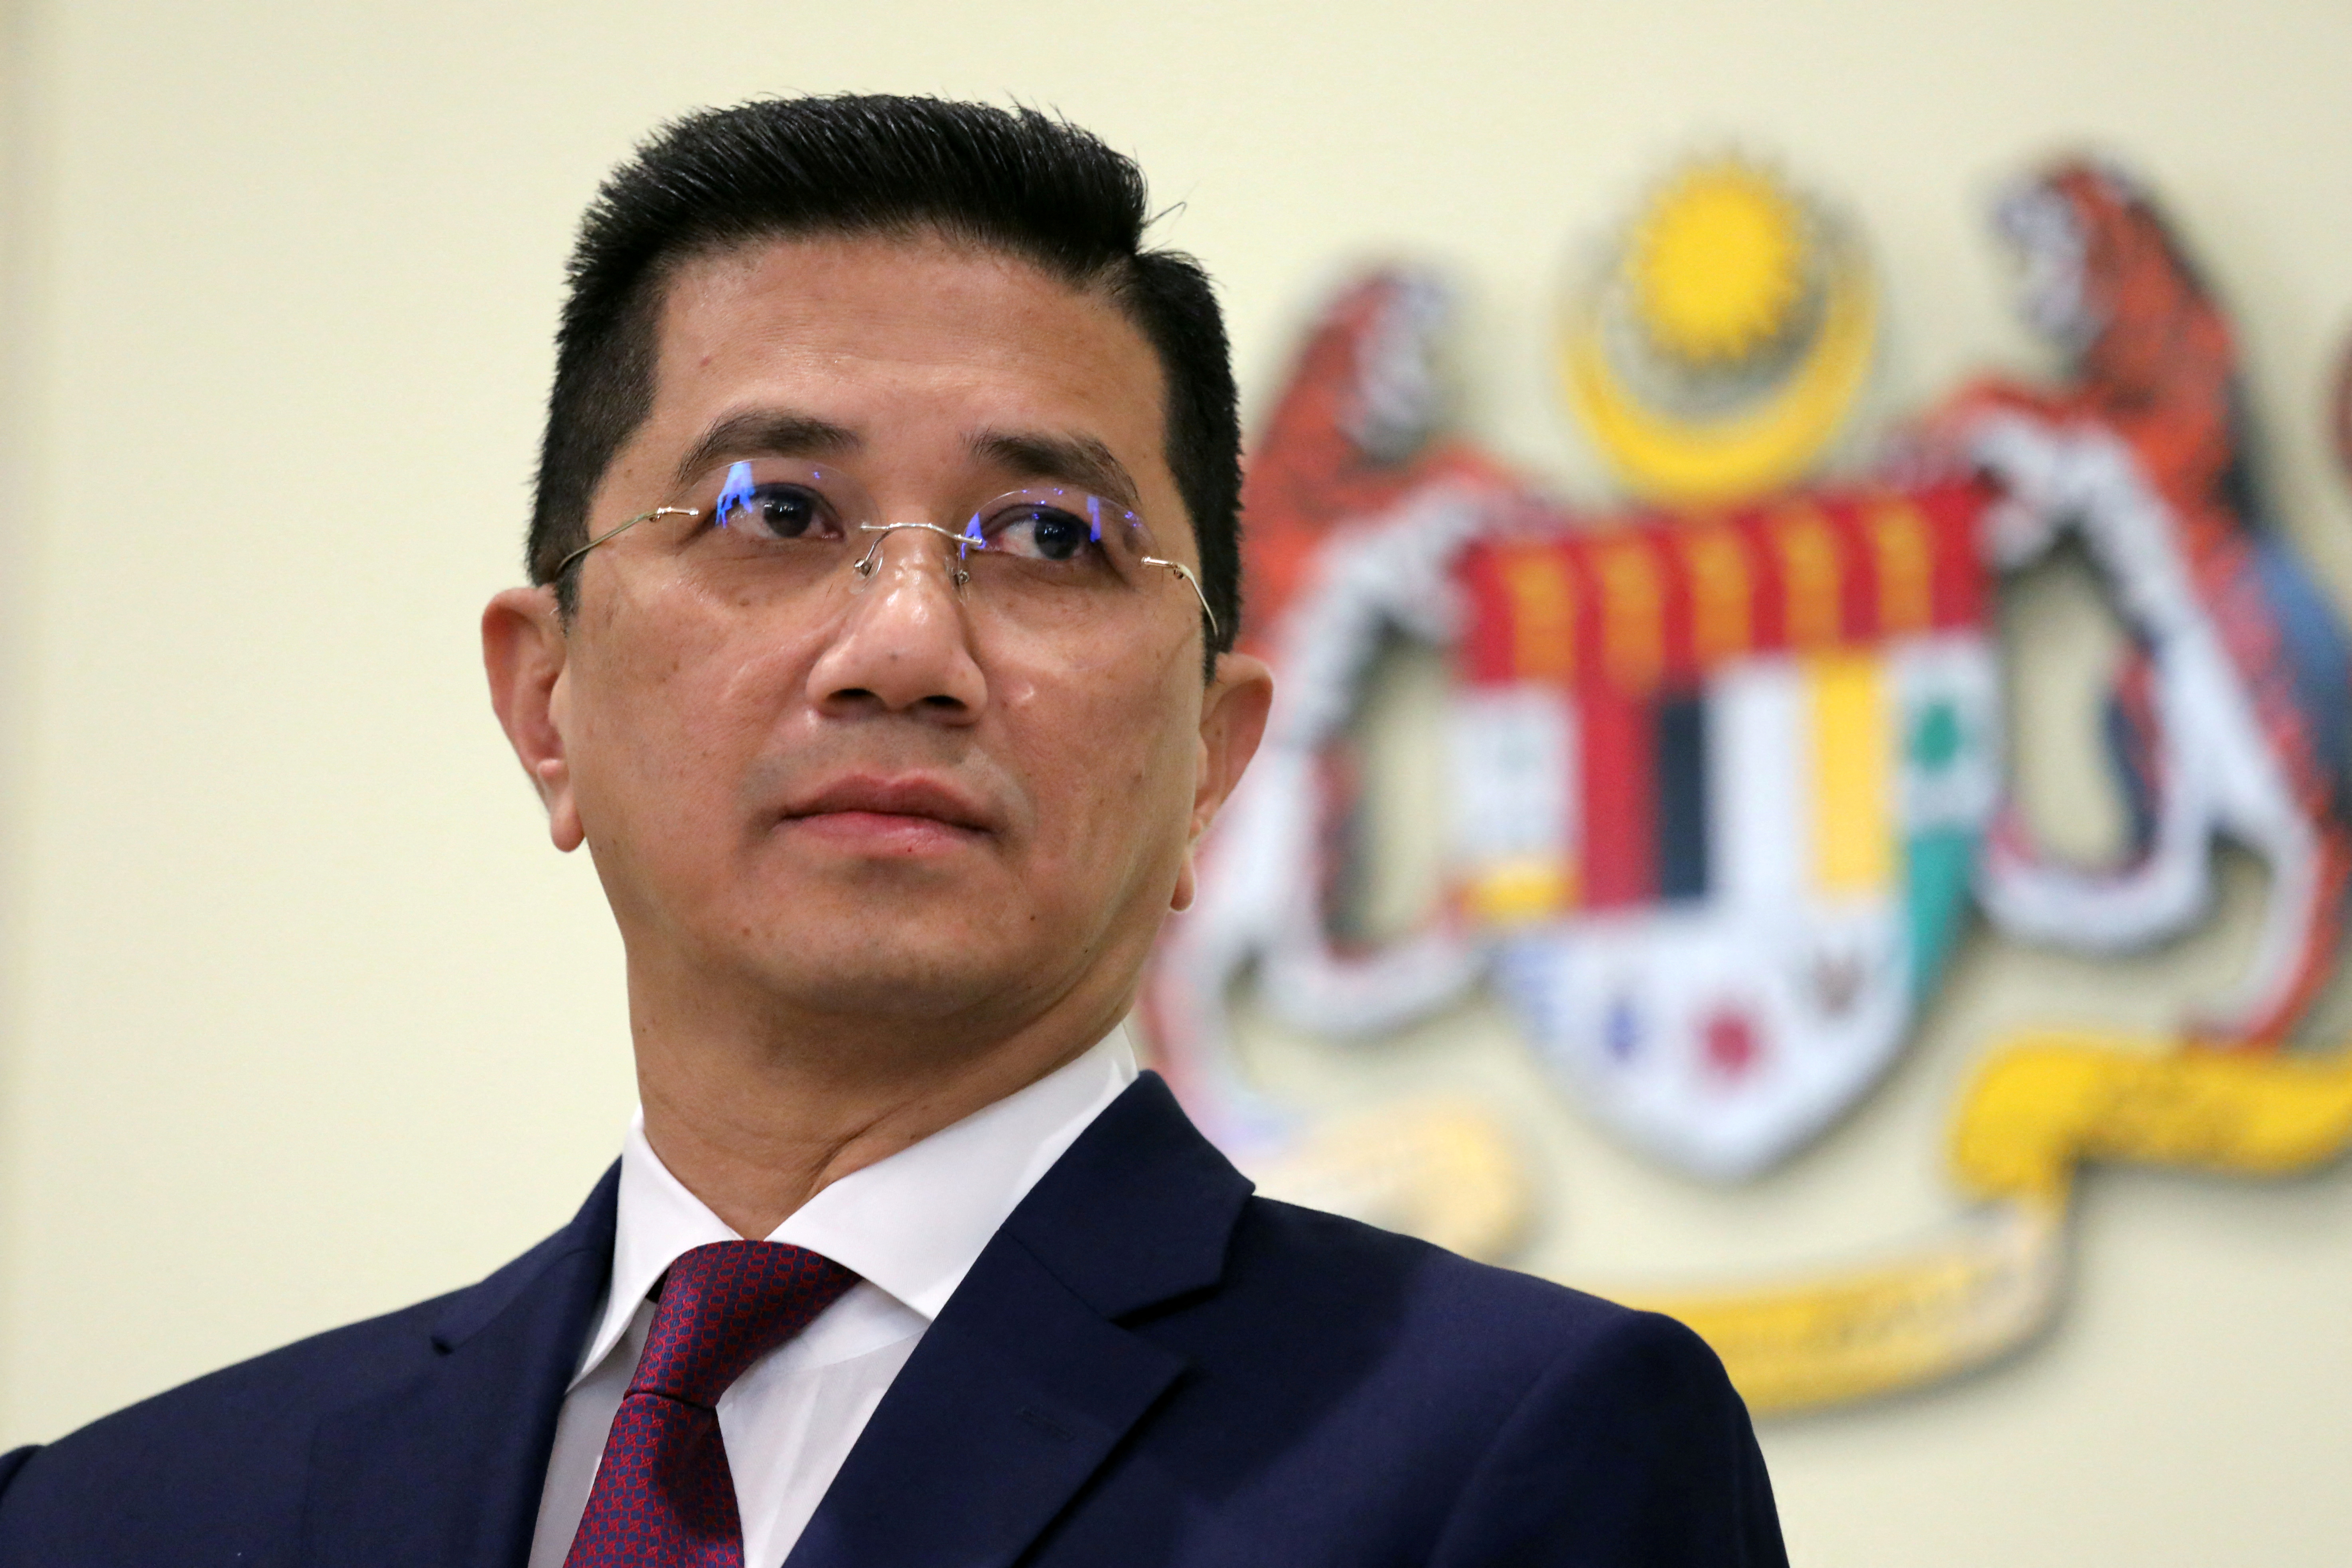 Malaysia's Minister of International Trade and Industry Azmin Ali reacts during a news conference in Putrajaya